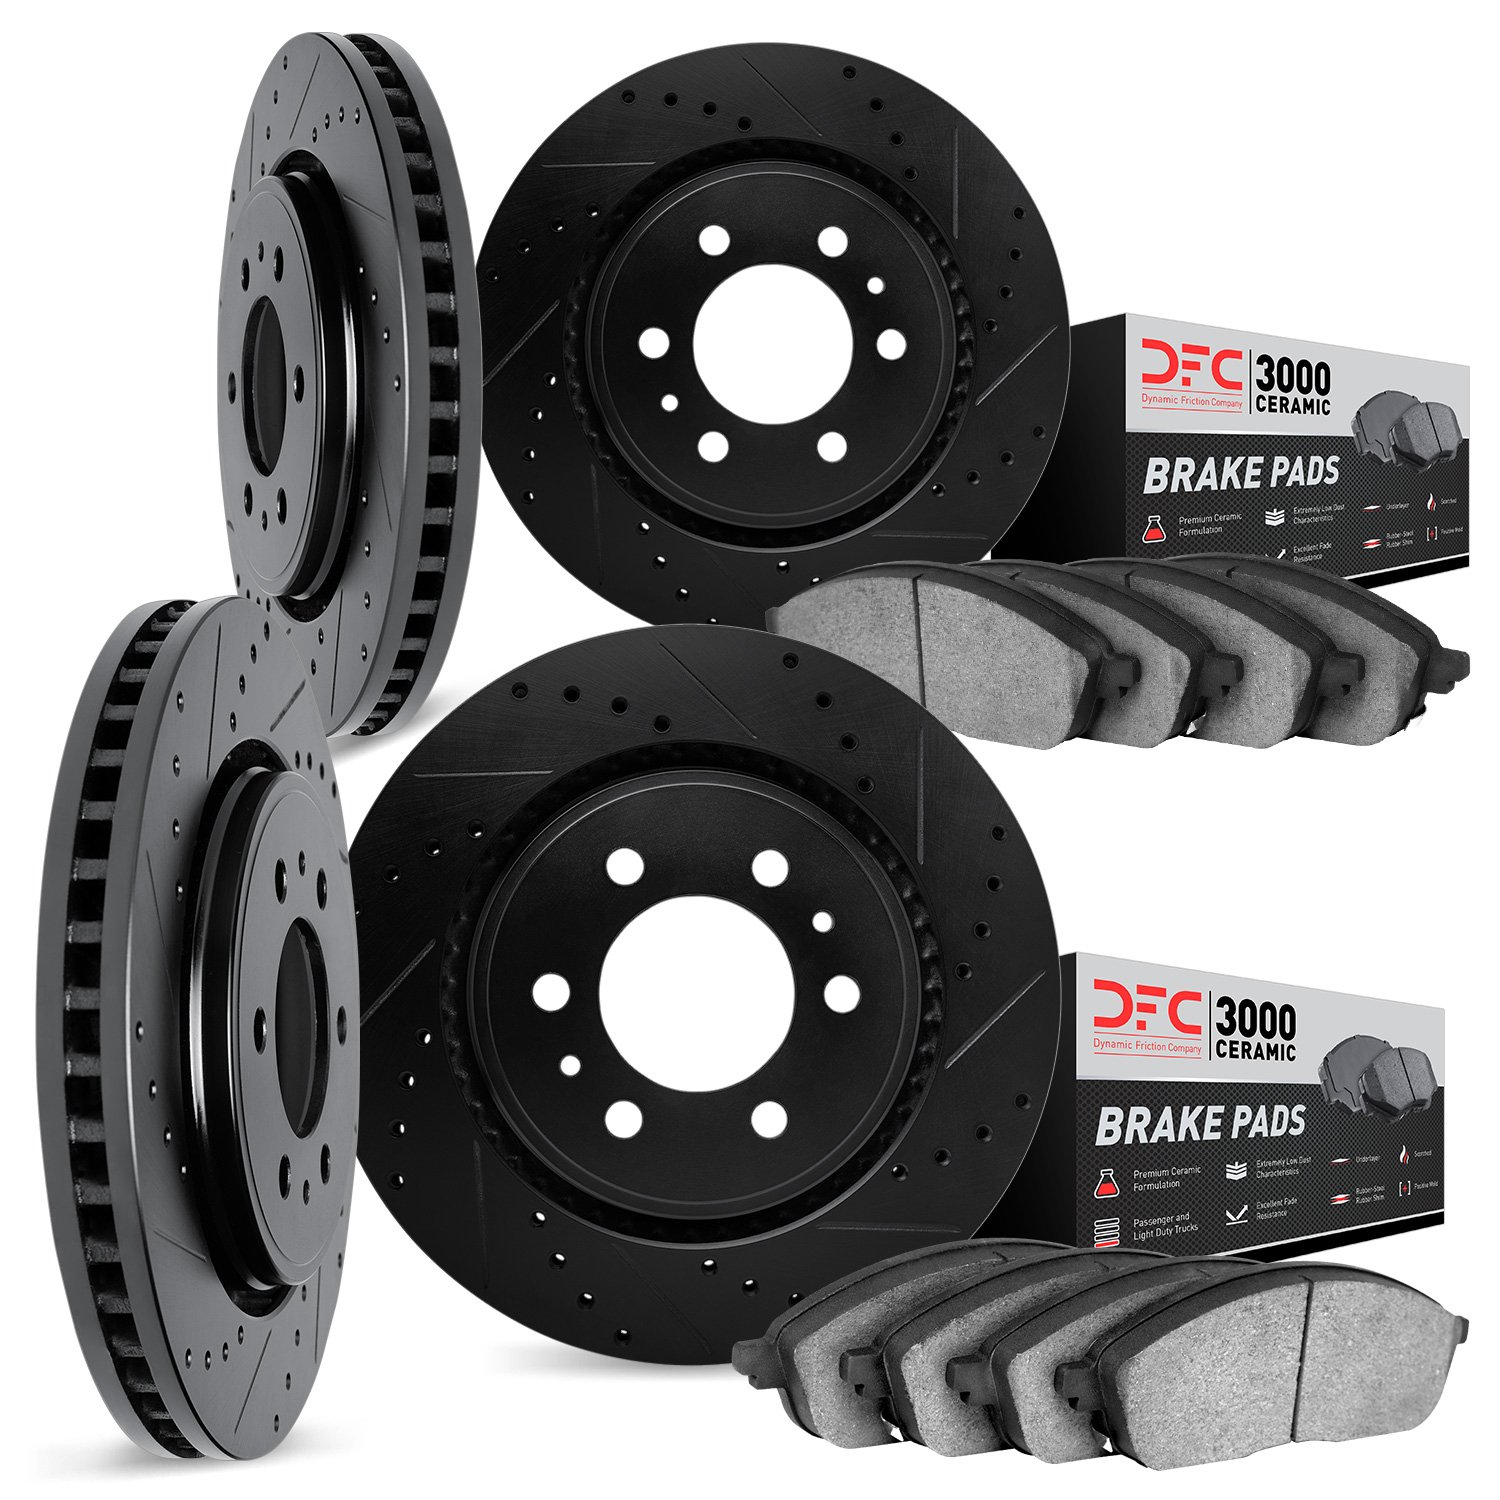 8304-67070 Drilled/Slotted Brake Rotors with 3000-Series Ceramic Brake Pads Kit [Black], Fits Select Infiniti/Nissan, Position: